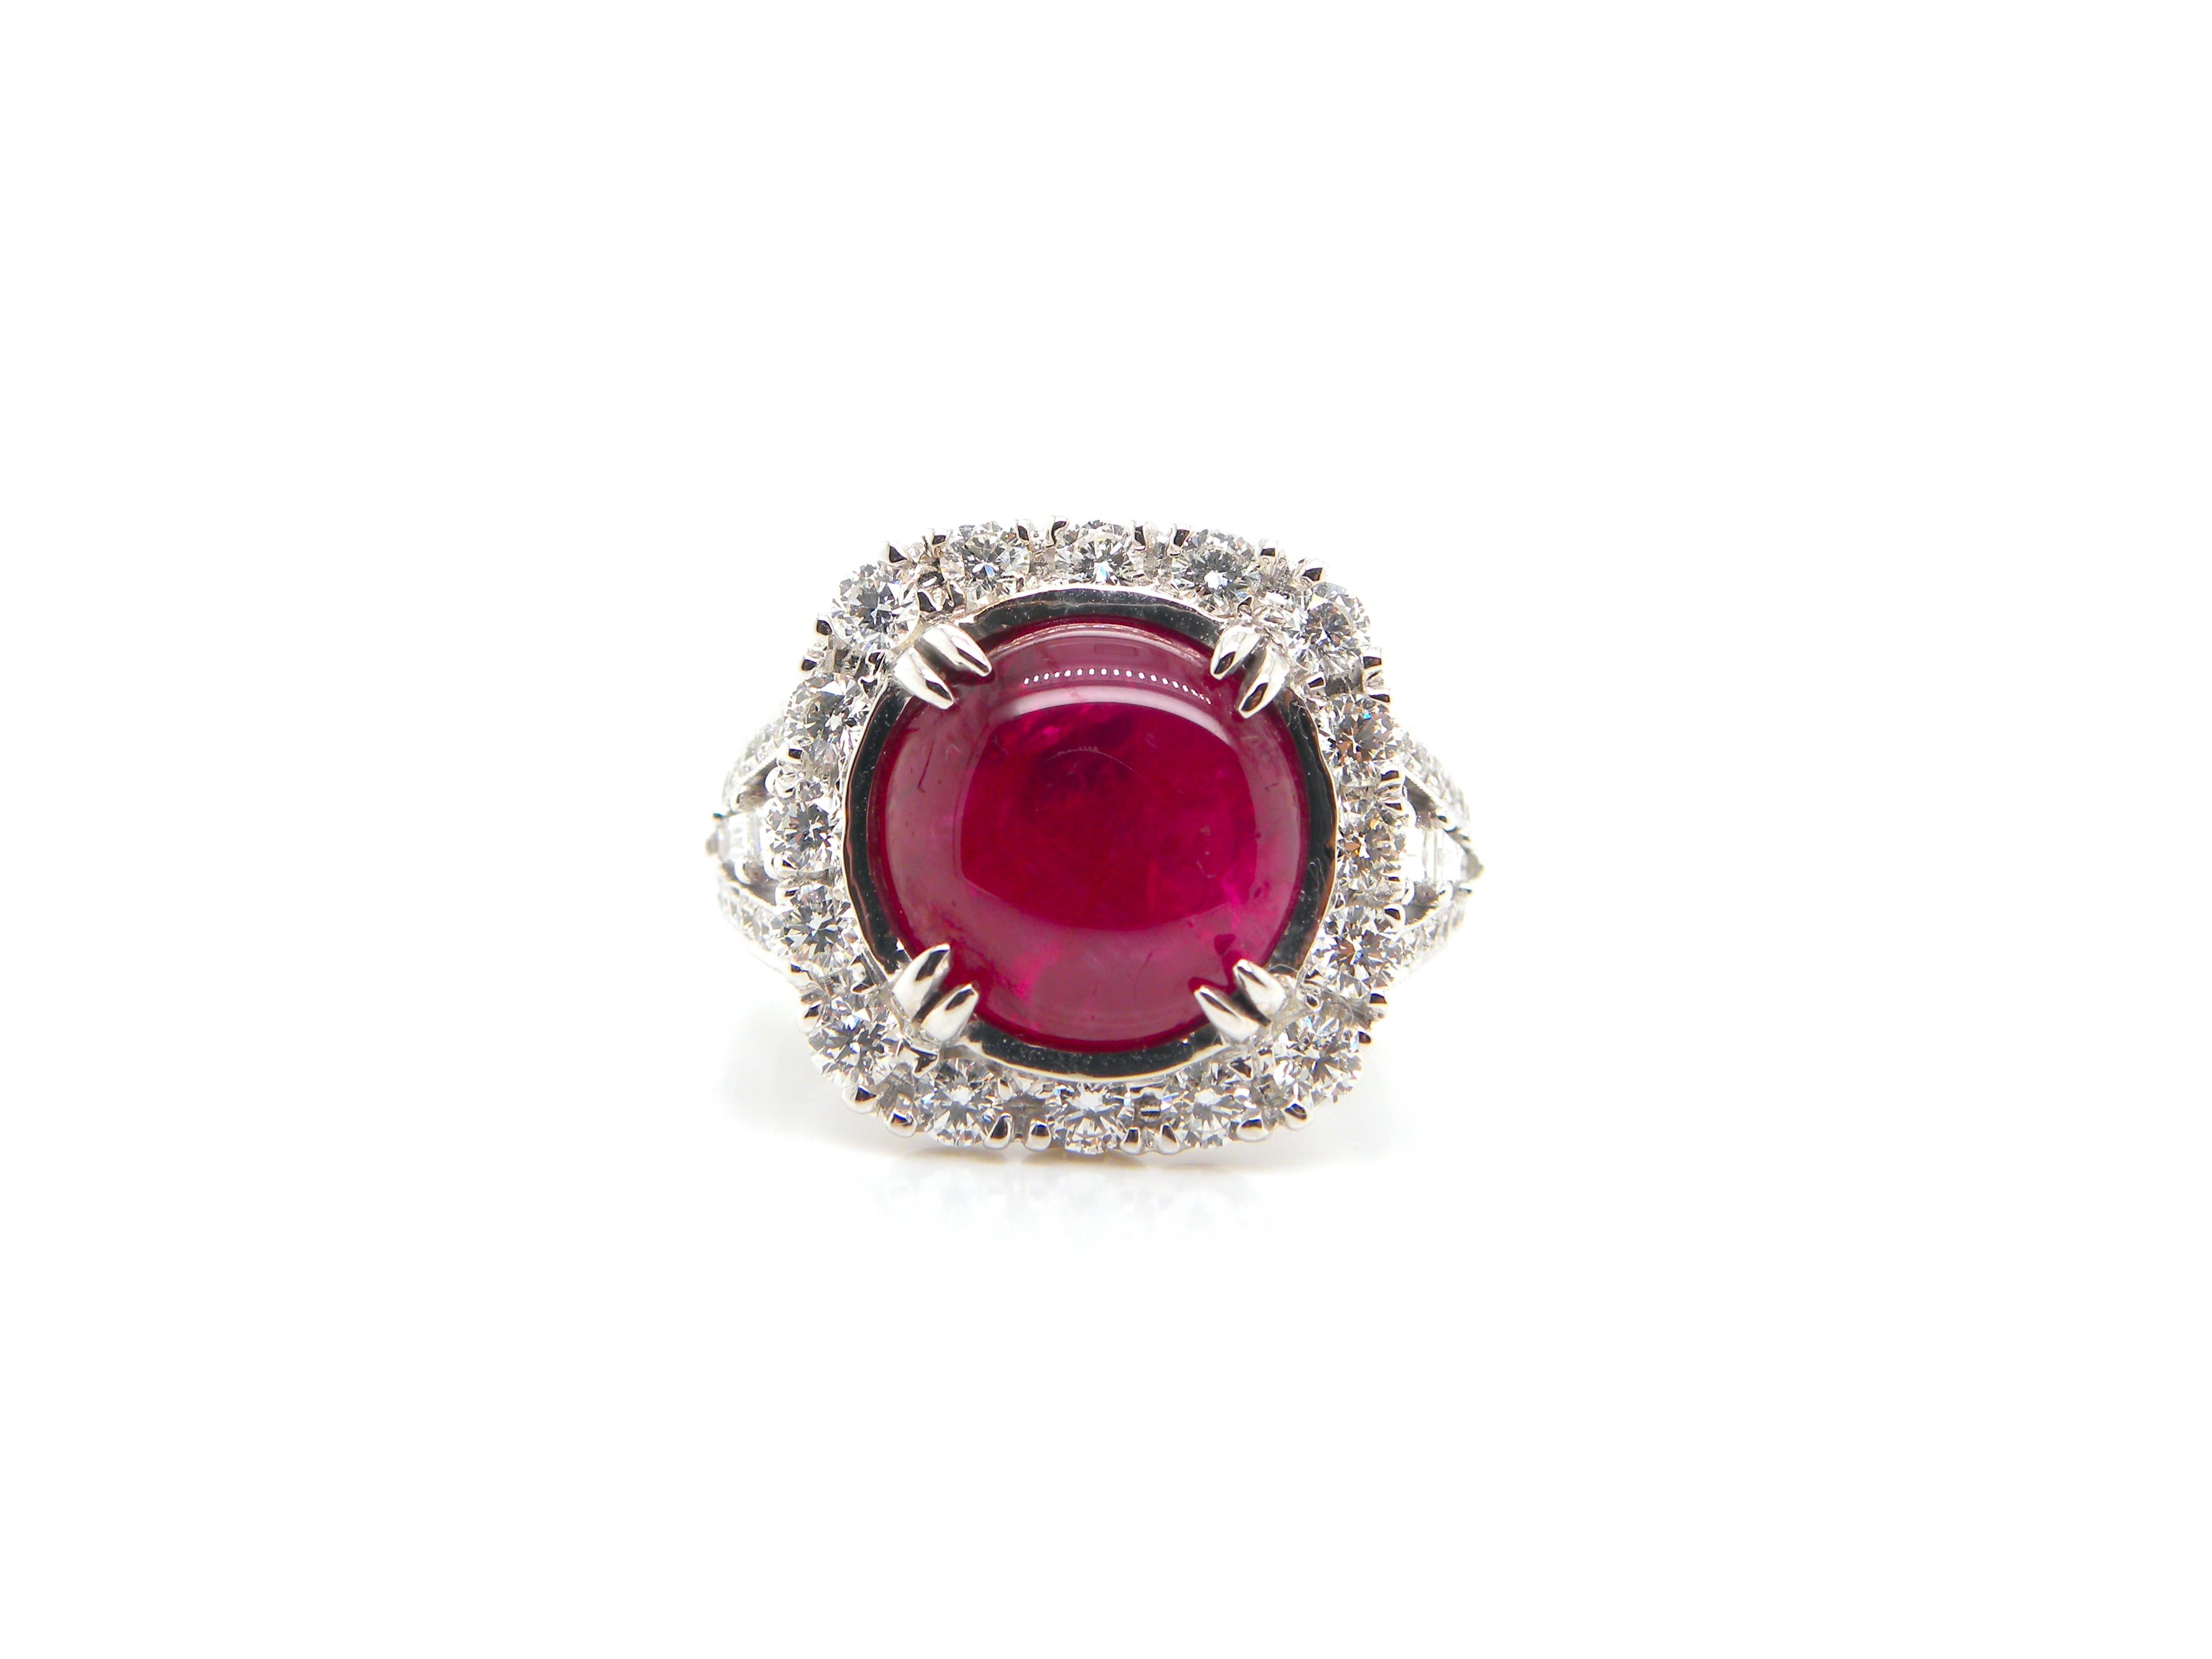 8.33 Carat GRS Certified Burma Mogok No Heat Star Ruby White Diamond Gold Ring:

A stunning ring, it features a rare GRS certified Burmese unheated star ruby weighing 8.33 carat surrounded by numerous white round brilliant-cut and baguette-cut